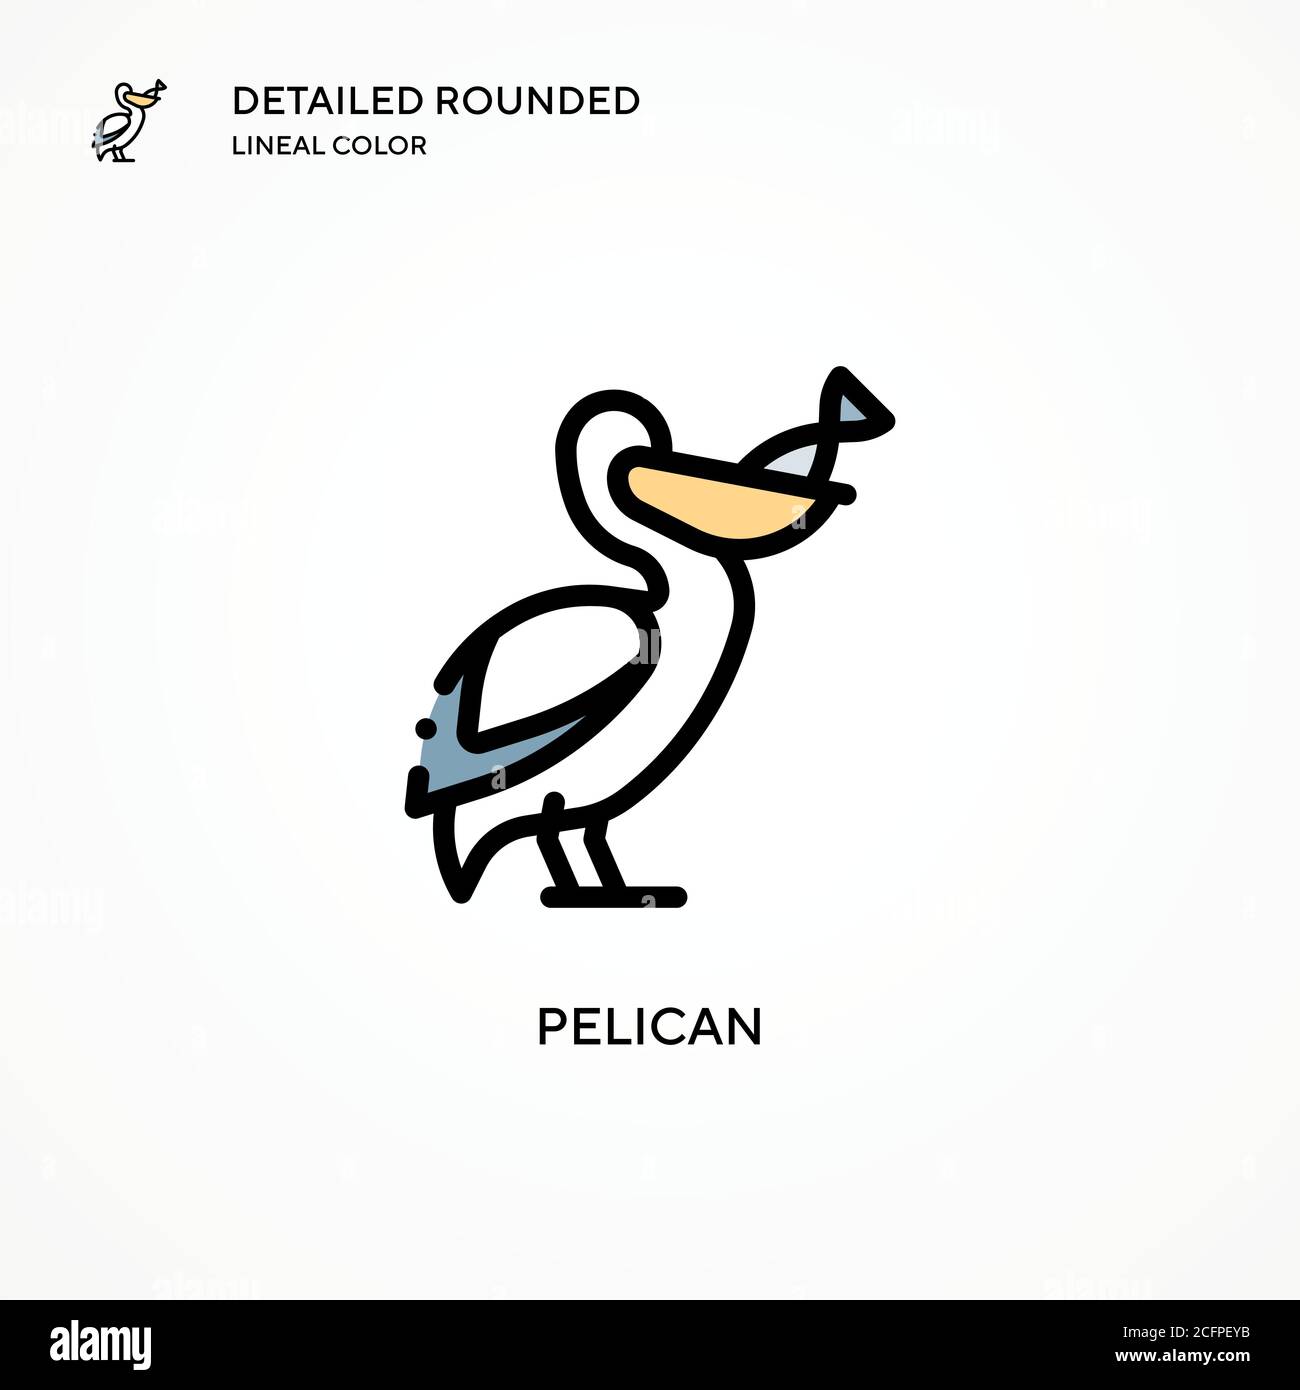 Pelican vector icon. Modern vector illustration concepts. Easy to edit and customize. Stock Vector